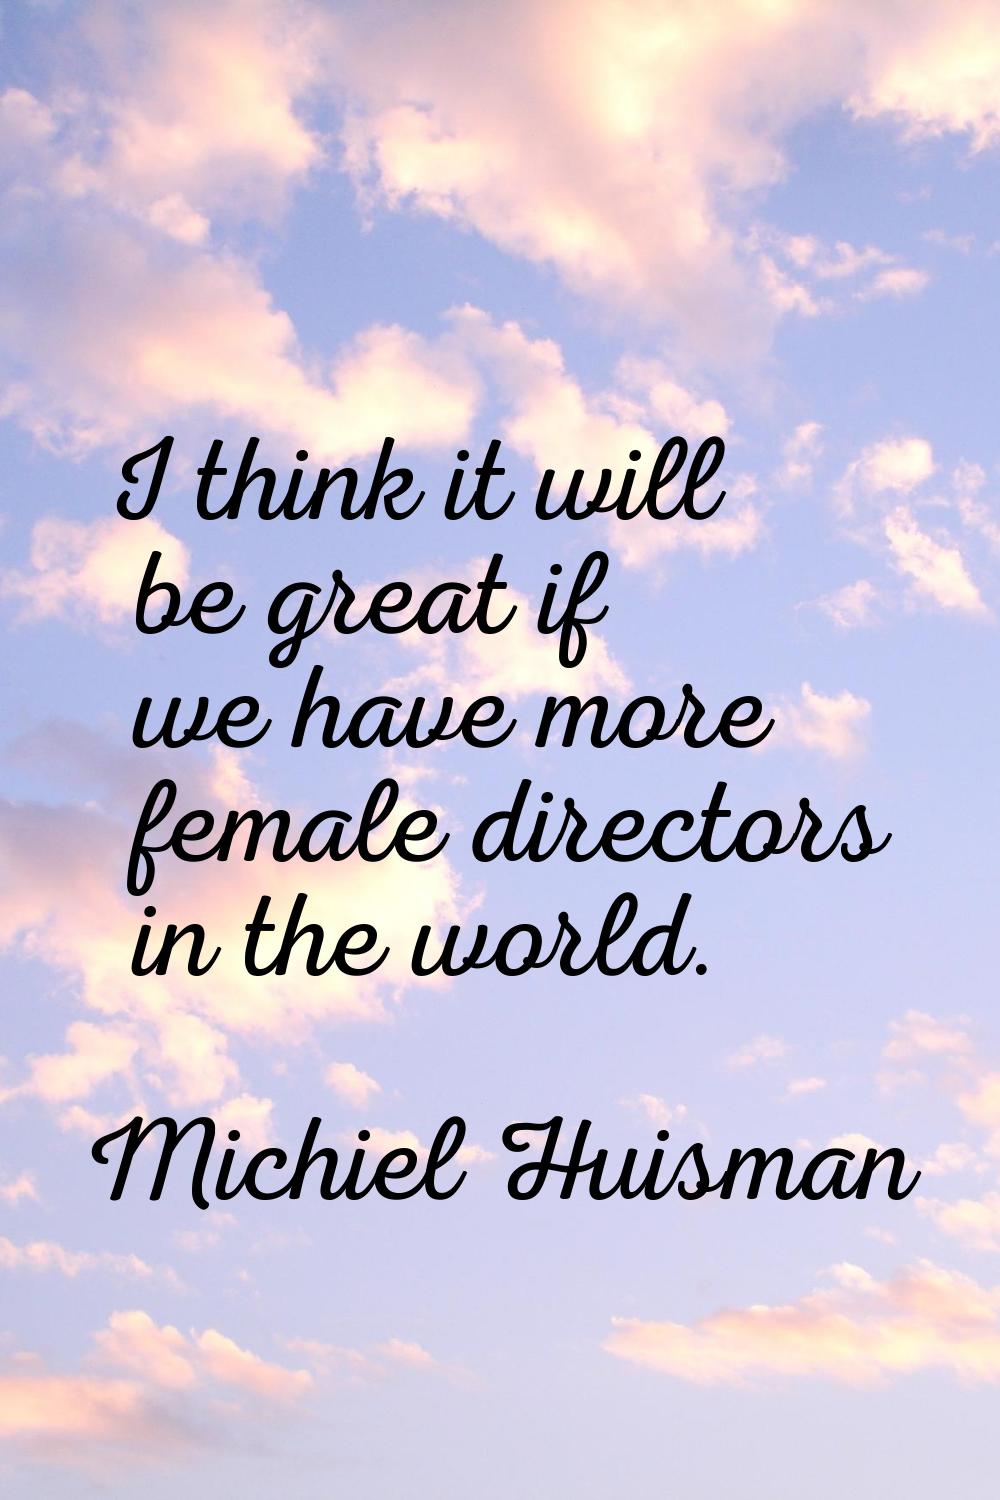 I think it will be great if we have more female directors in the world.